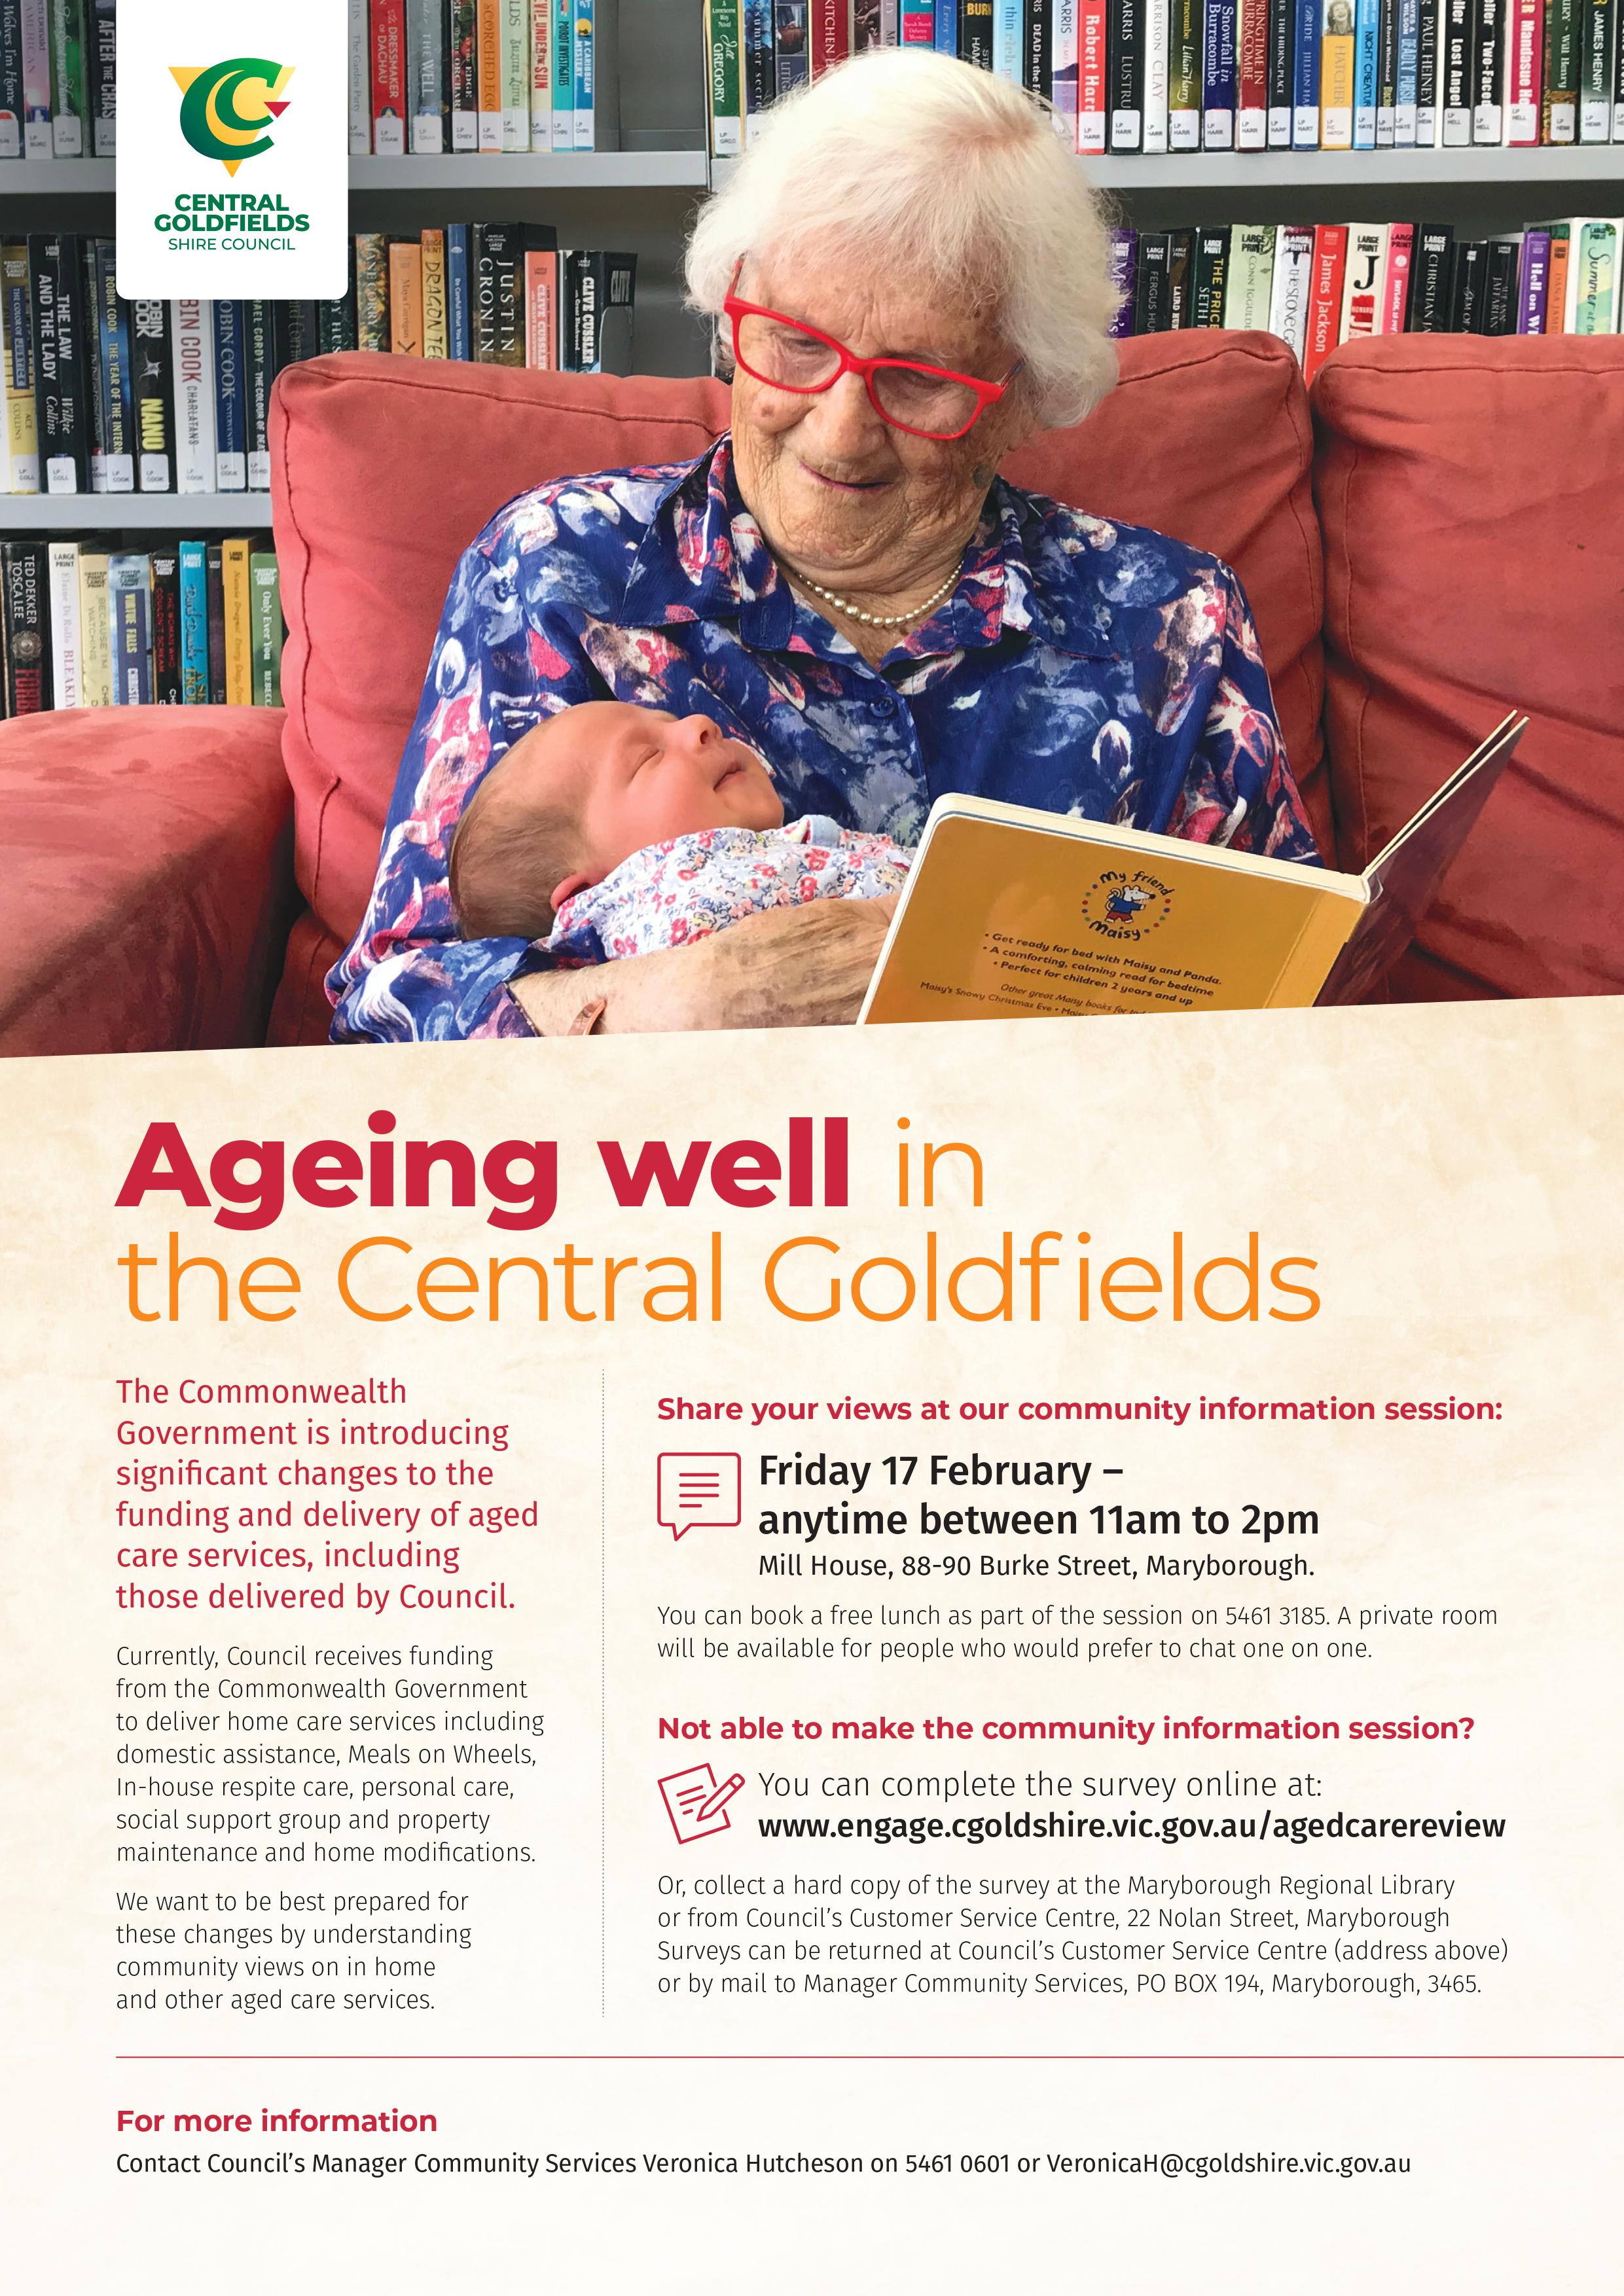 217257 CGSC Ageing Well in the Central Goldfields A4 Flyer D1.jpg